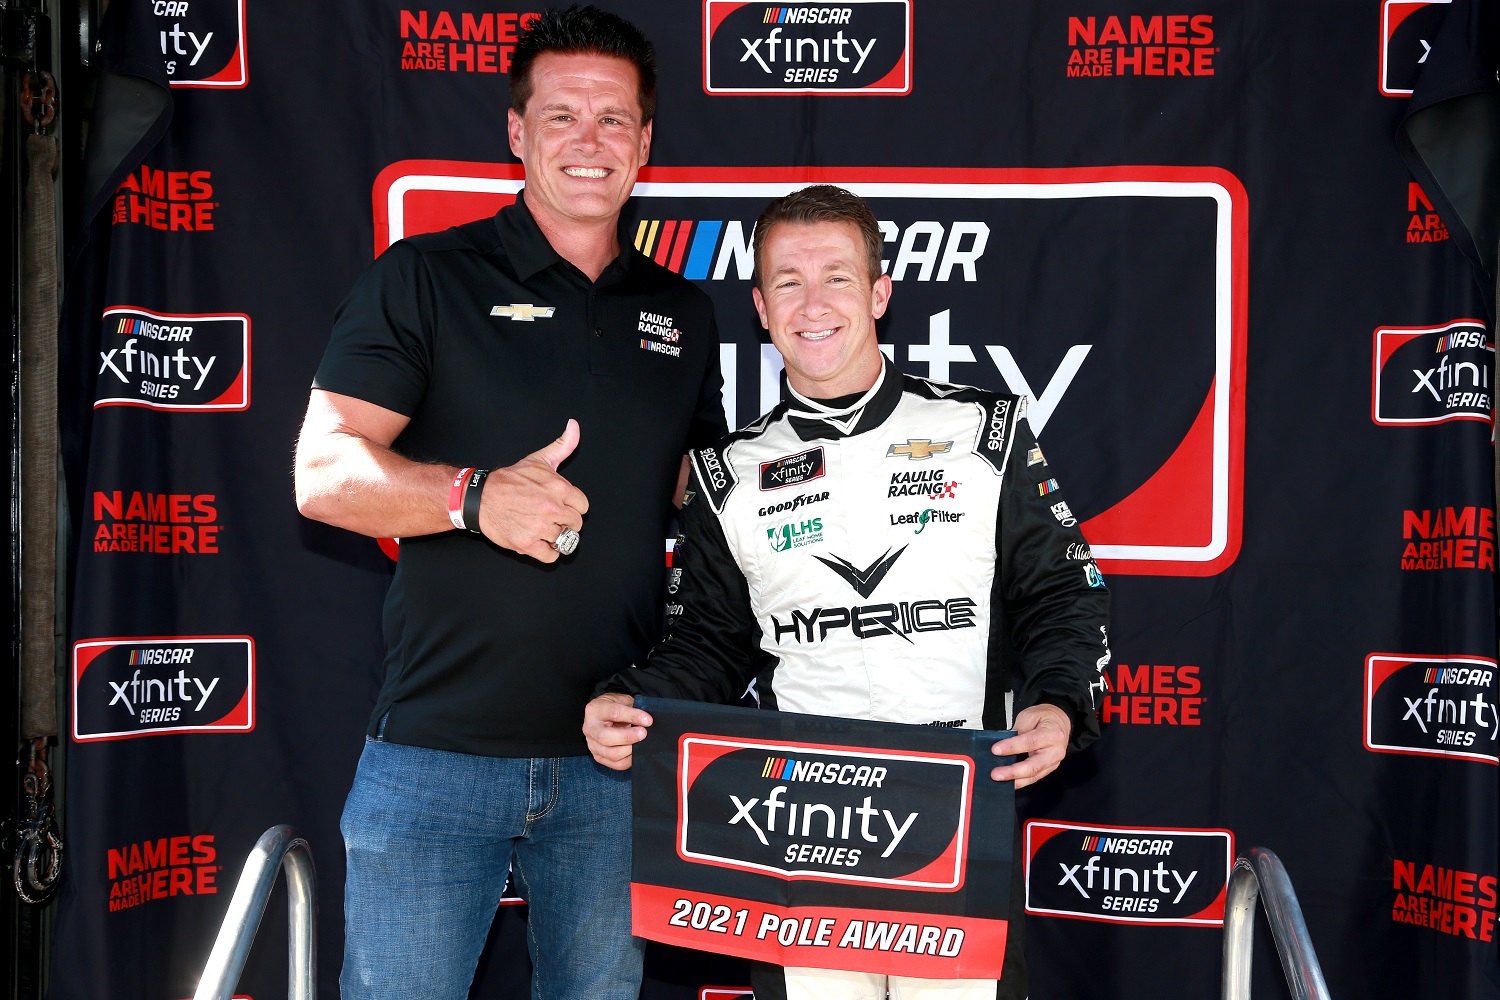 Matt Kaulig, owner of Kaulig Racing, and AJ Allmendinger, driver of the No. 16 Chevrolet, pose for photos after winning the pole award during qualifying for the NASCAR Xfinity Series Pennzoil 150 at the Brickyard at Indianapolis Motor Speedway on Aug. 14, 2021.